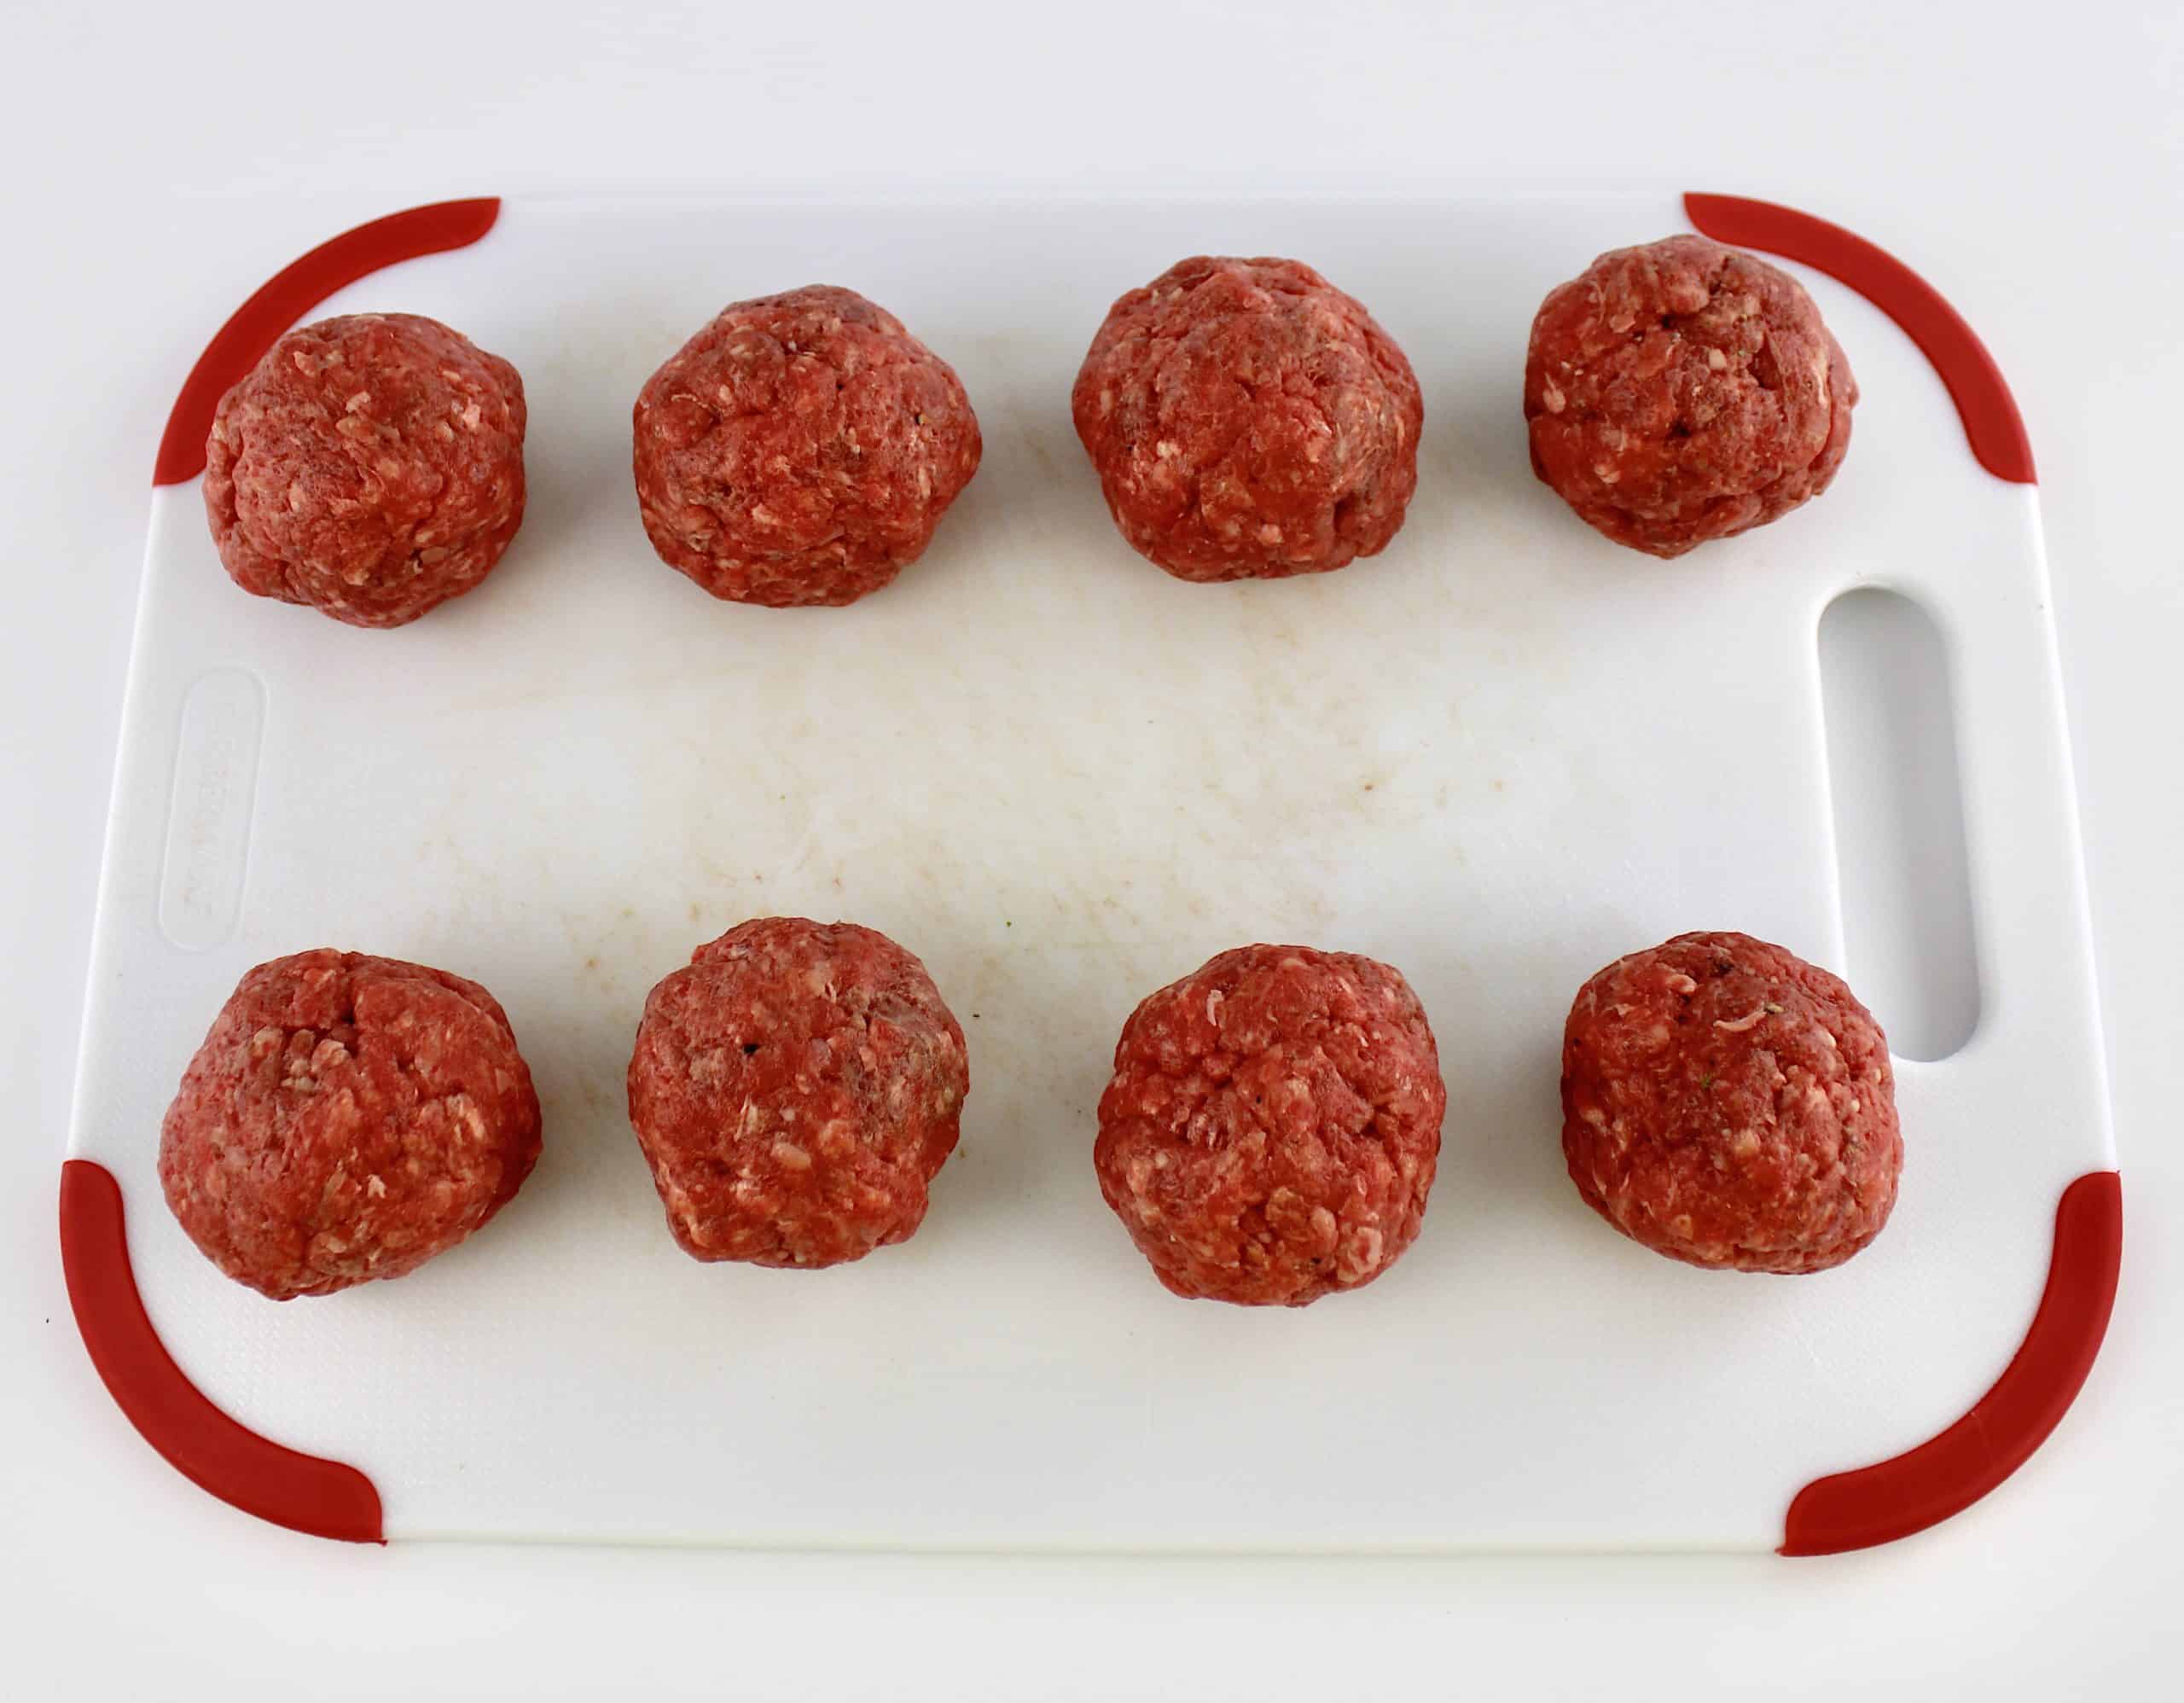 8 balls of ground beef on white cutting board with red trim